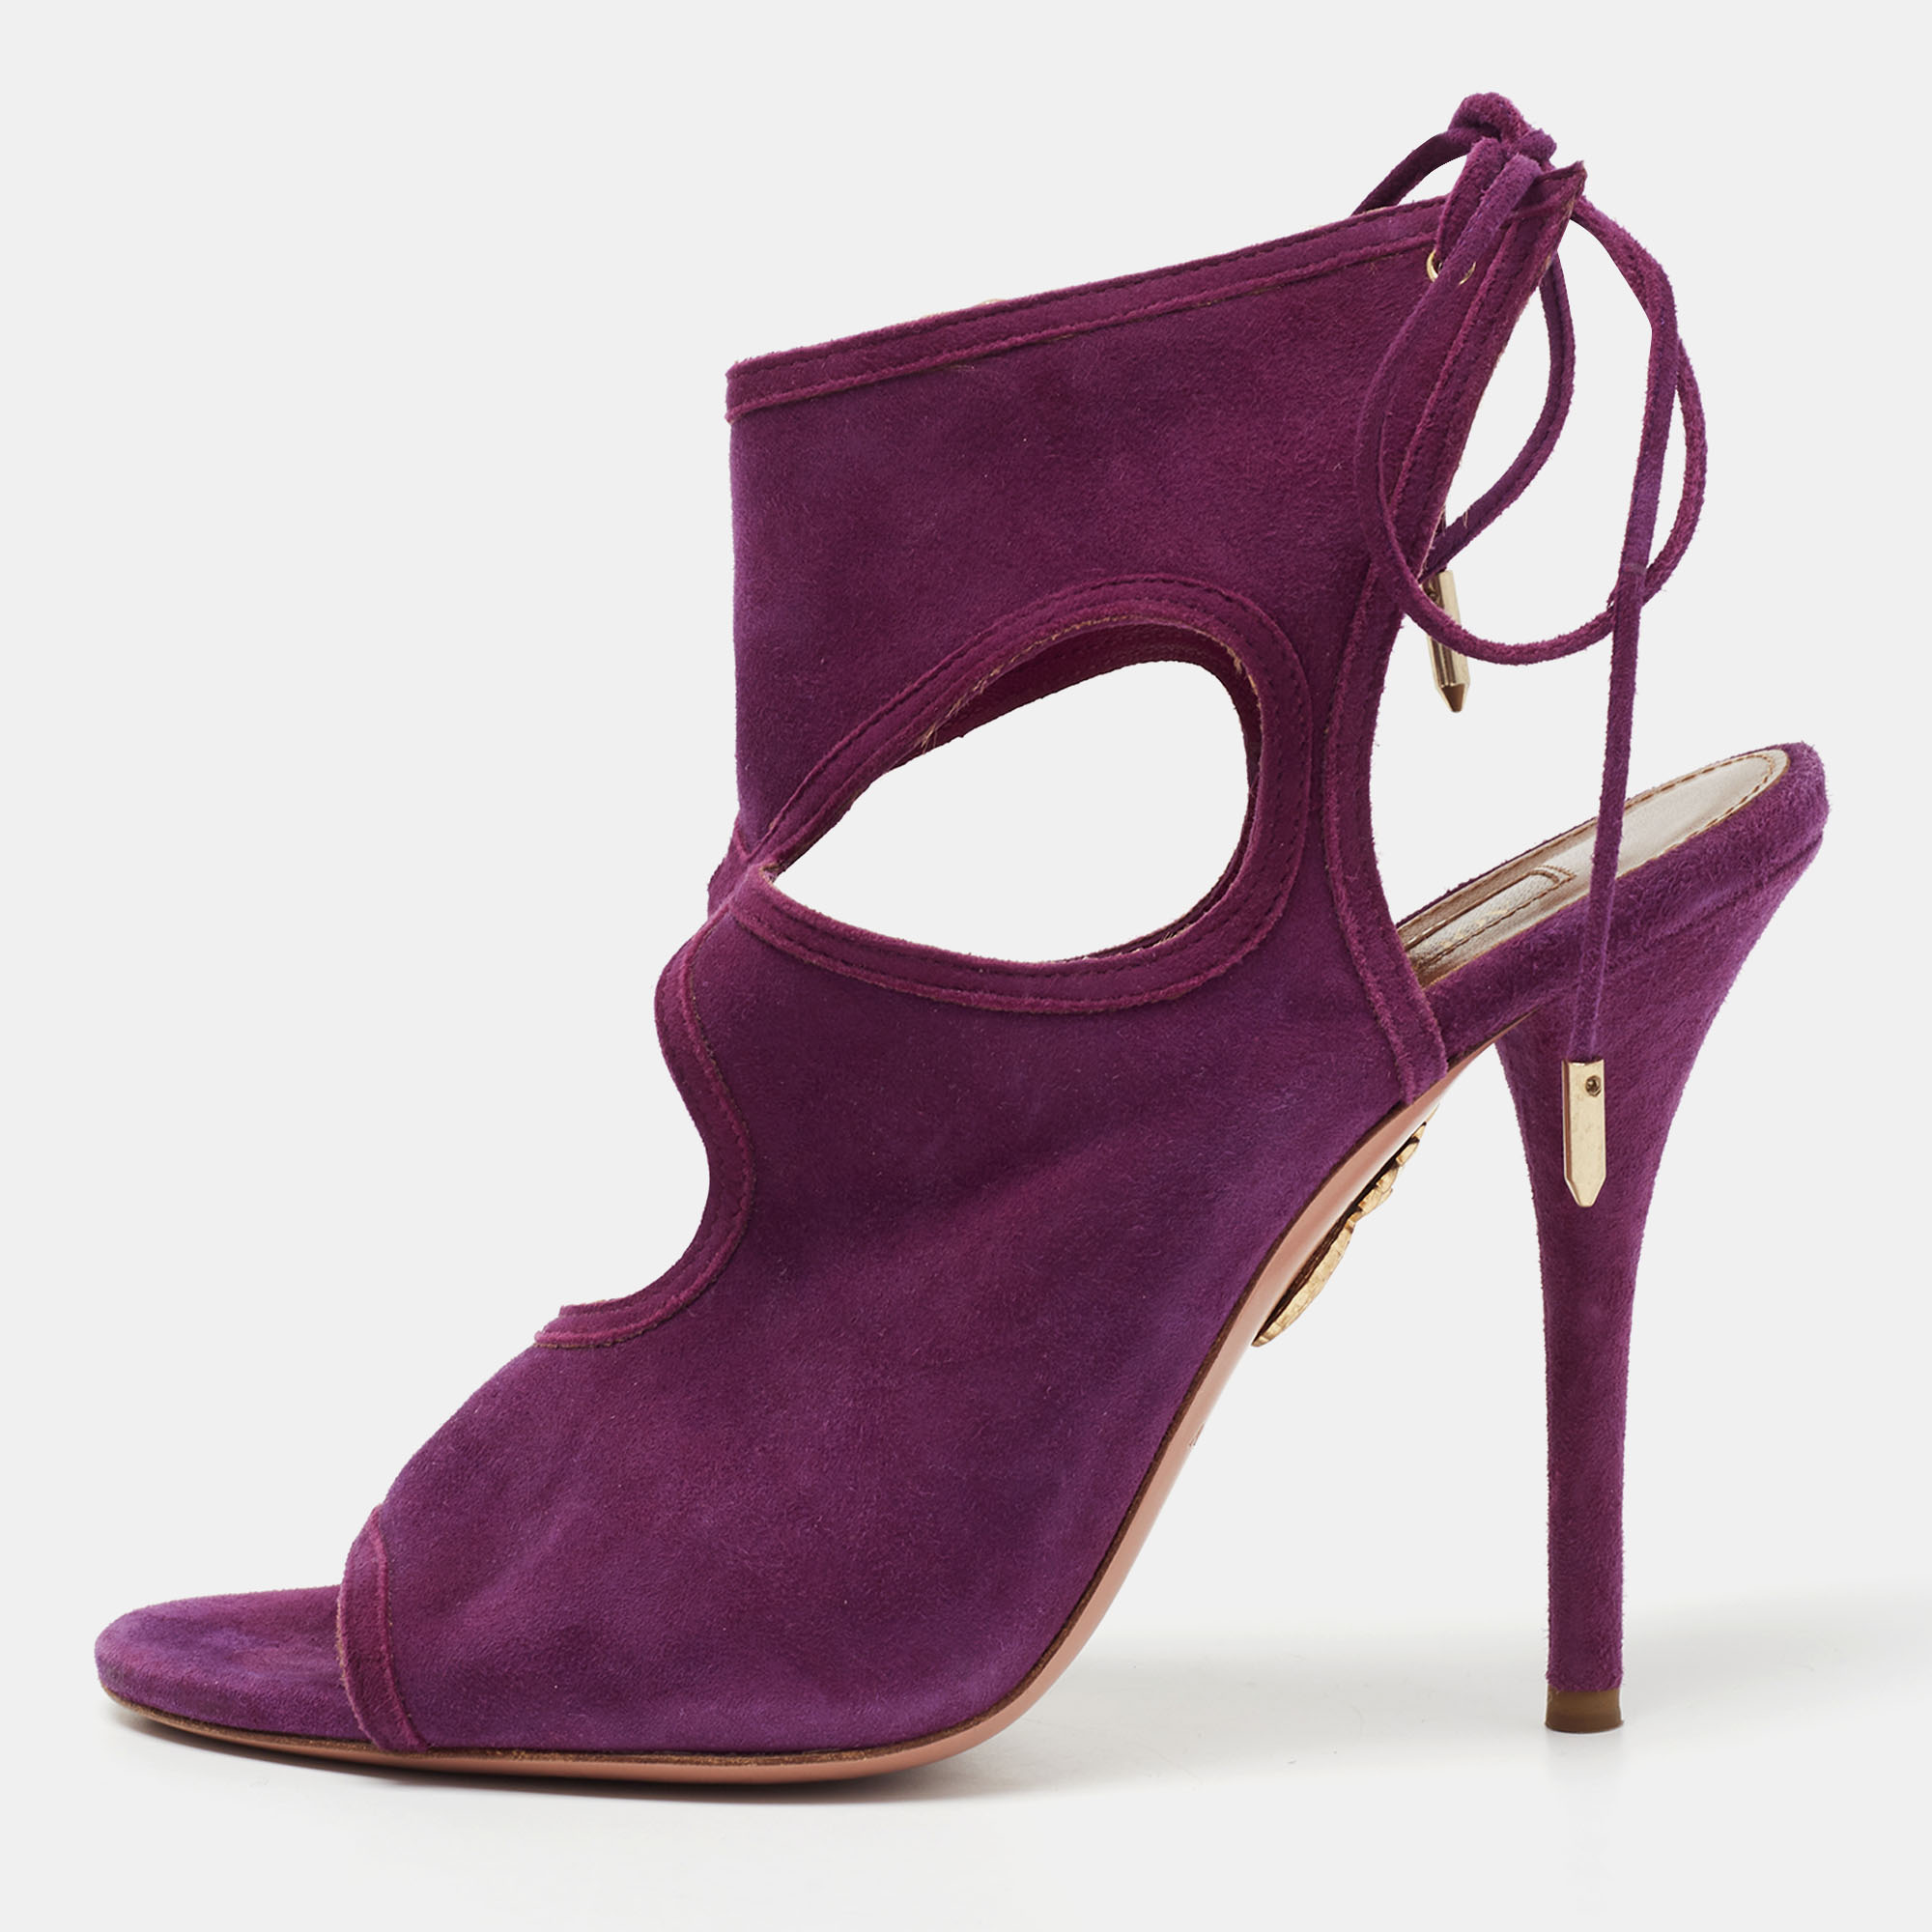 Aquazzura brings forth an amazing style in the form of these sandals that impart a stylish look to your ensemble. Designed from purple suede these sandals with cut out details ties and 10.5 cm heels are the perfect choice to rock a chic look.